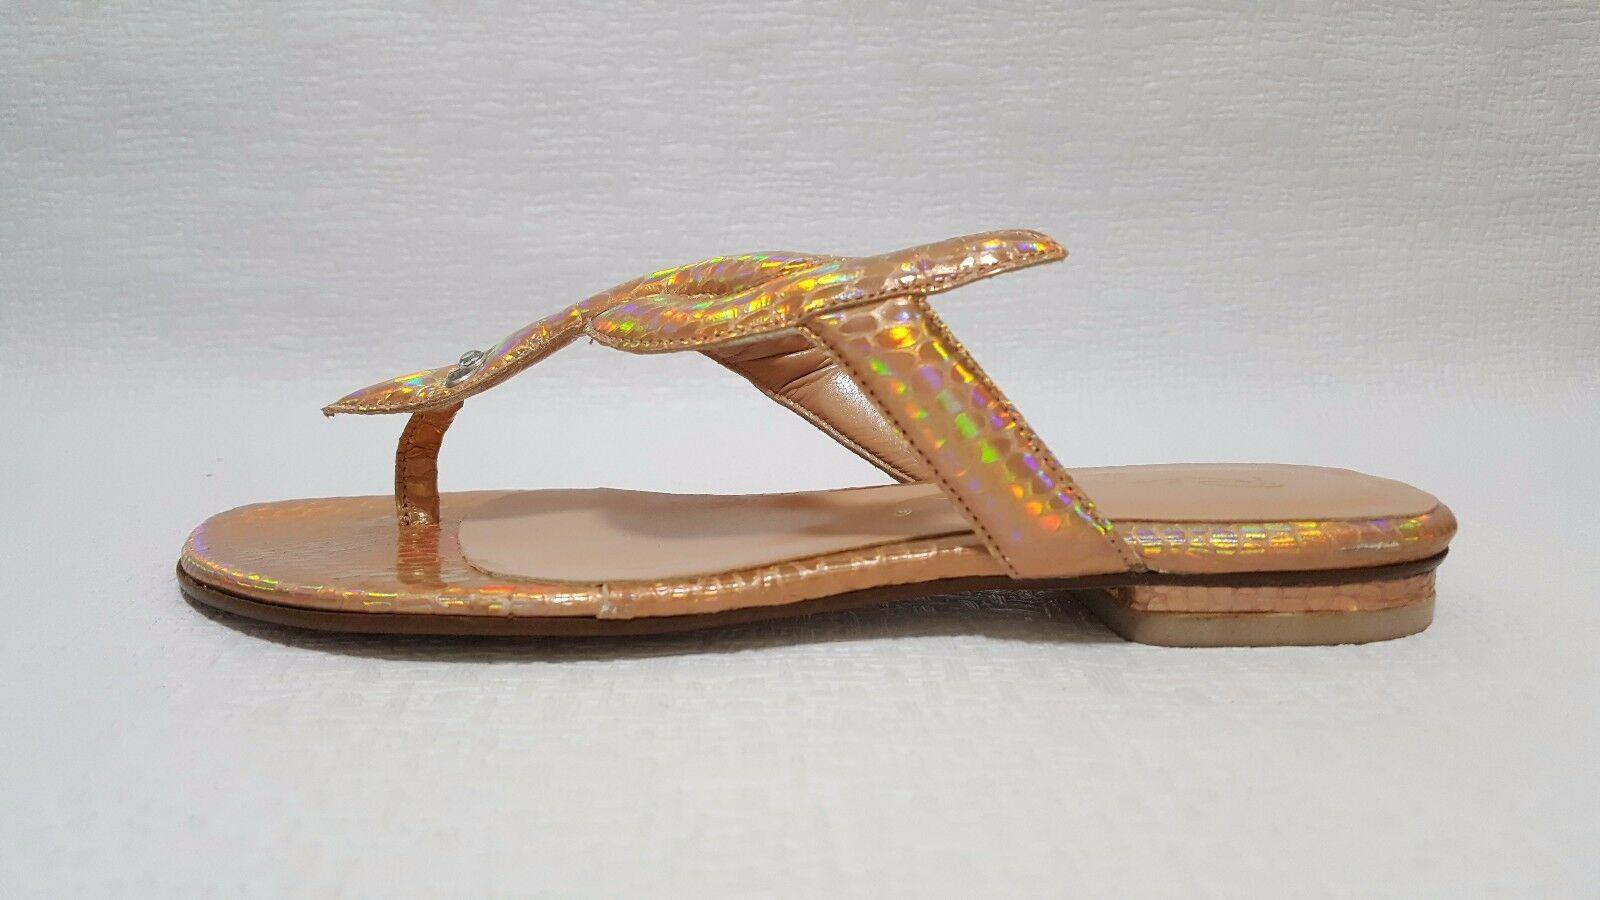 RIVIERA Women's Sandals Leather Gold Cobra Rame MADE in ITALY  EU 36 US 5 - SVNYFancy